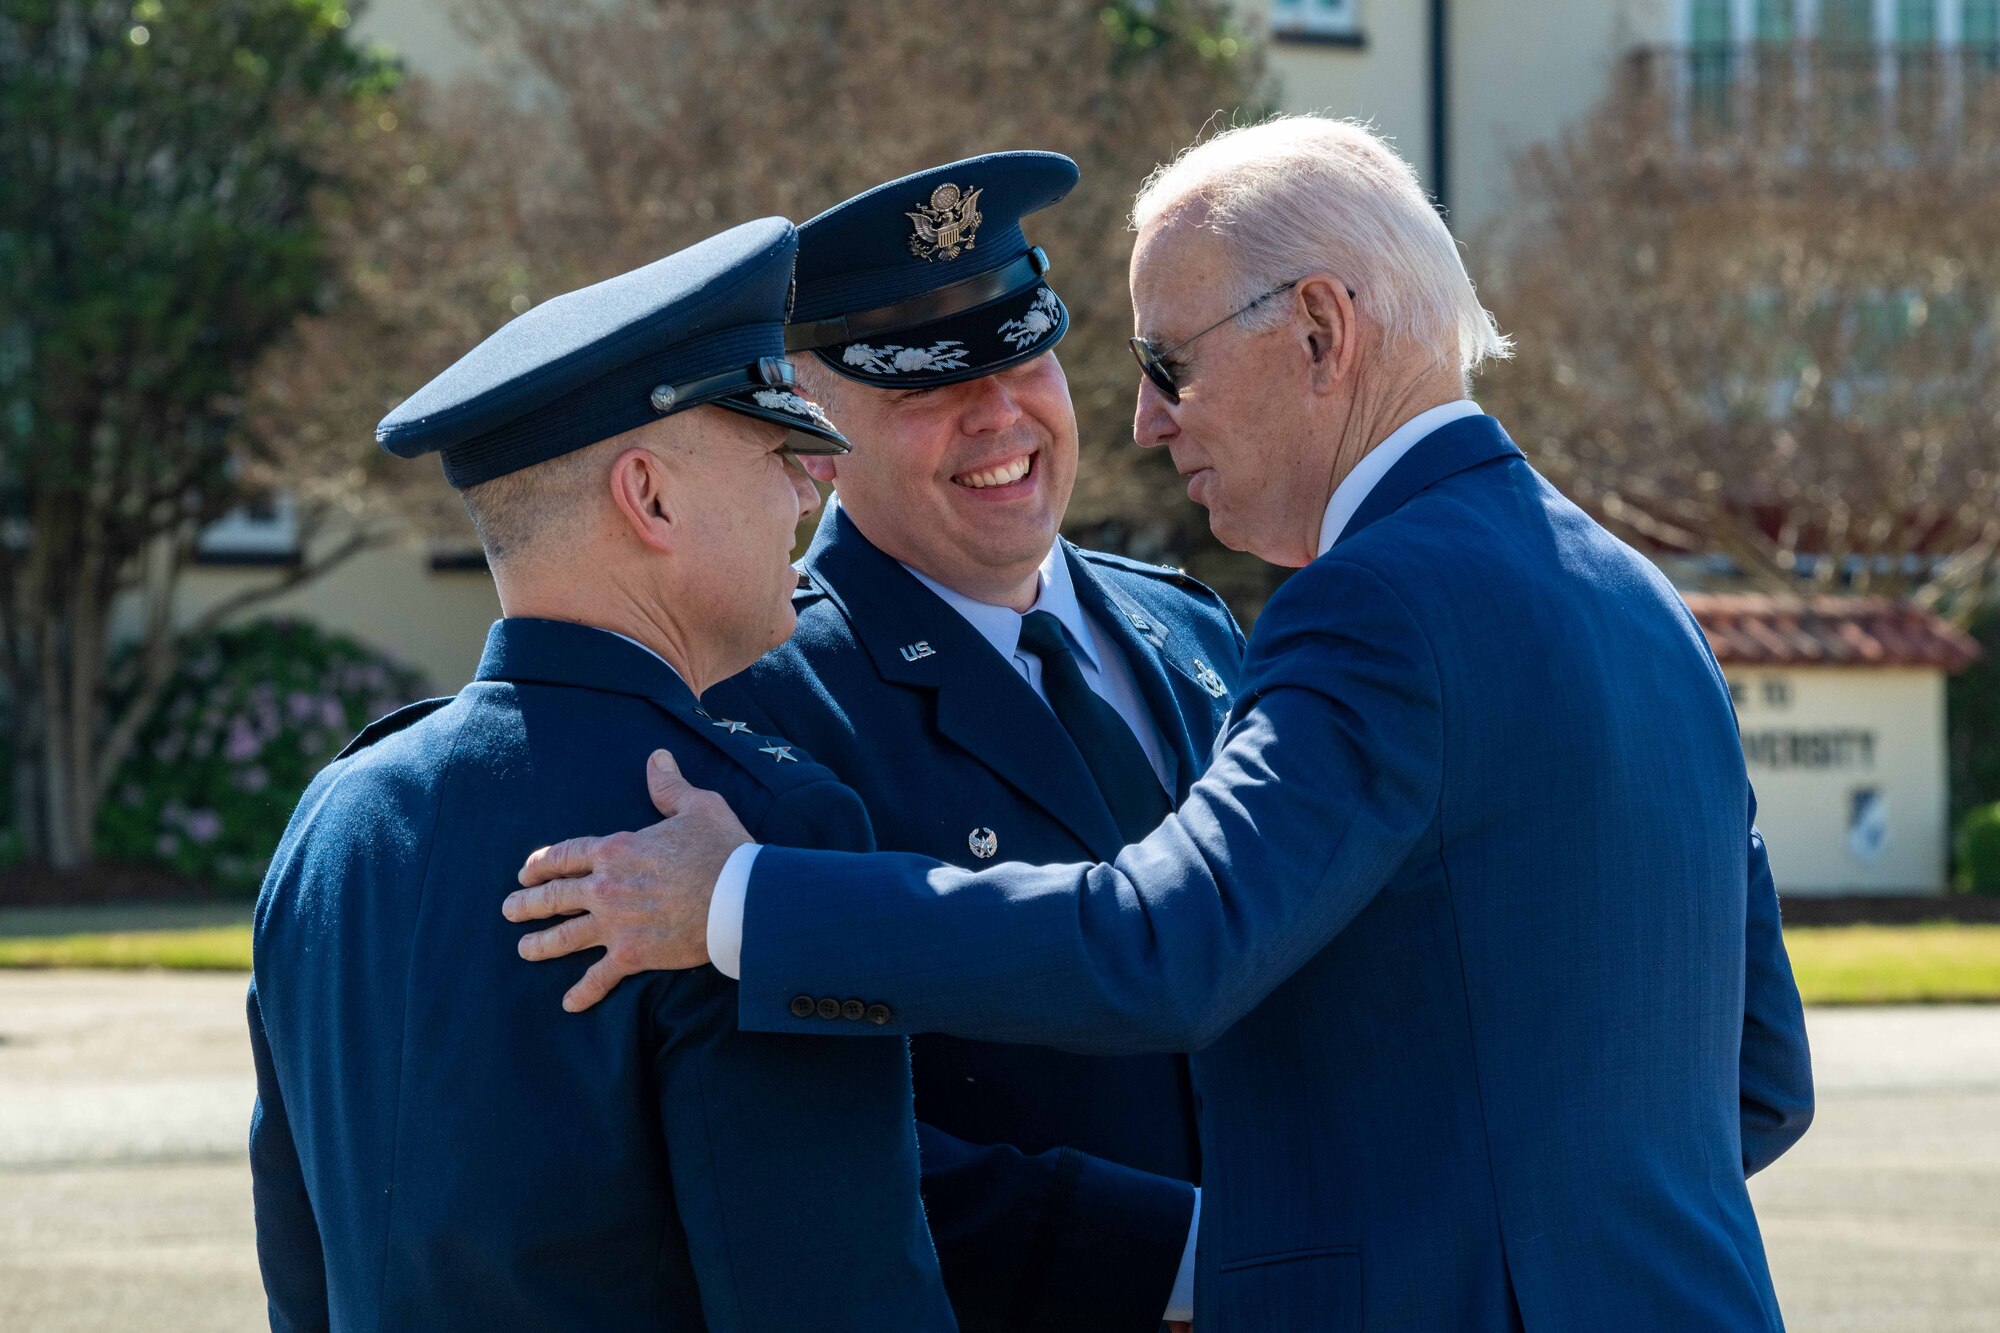 President Joe Biden greets Maj. Gen. William Holt and Col. Christopher Ledford at Maxwell Air Force Base, Mar. 5, 2023. Biden arrived at Maxwell in route to Selma to commemorate the 58th anniversary of Bloody Sunday.